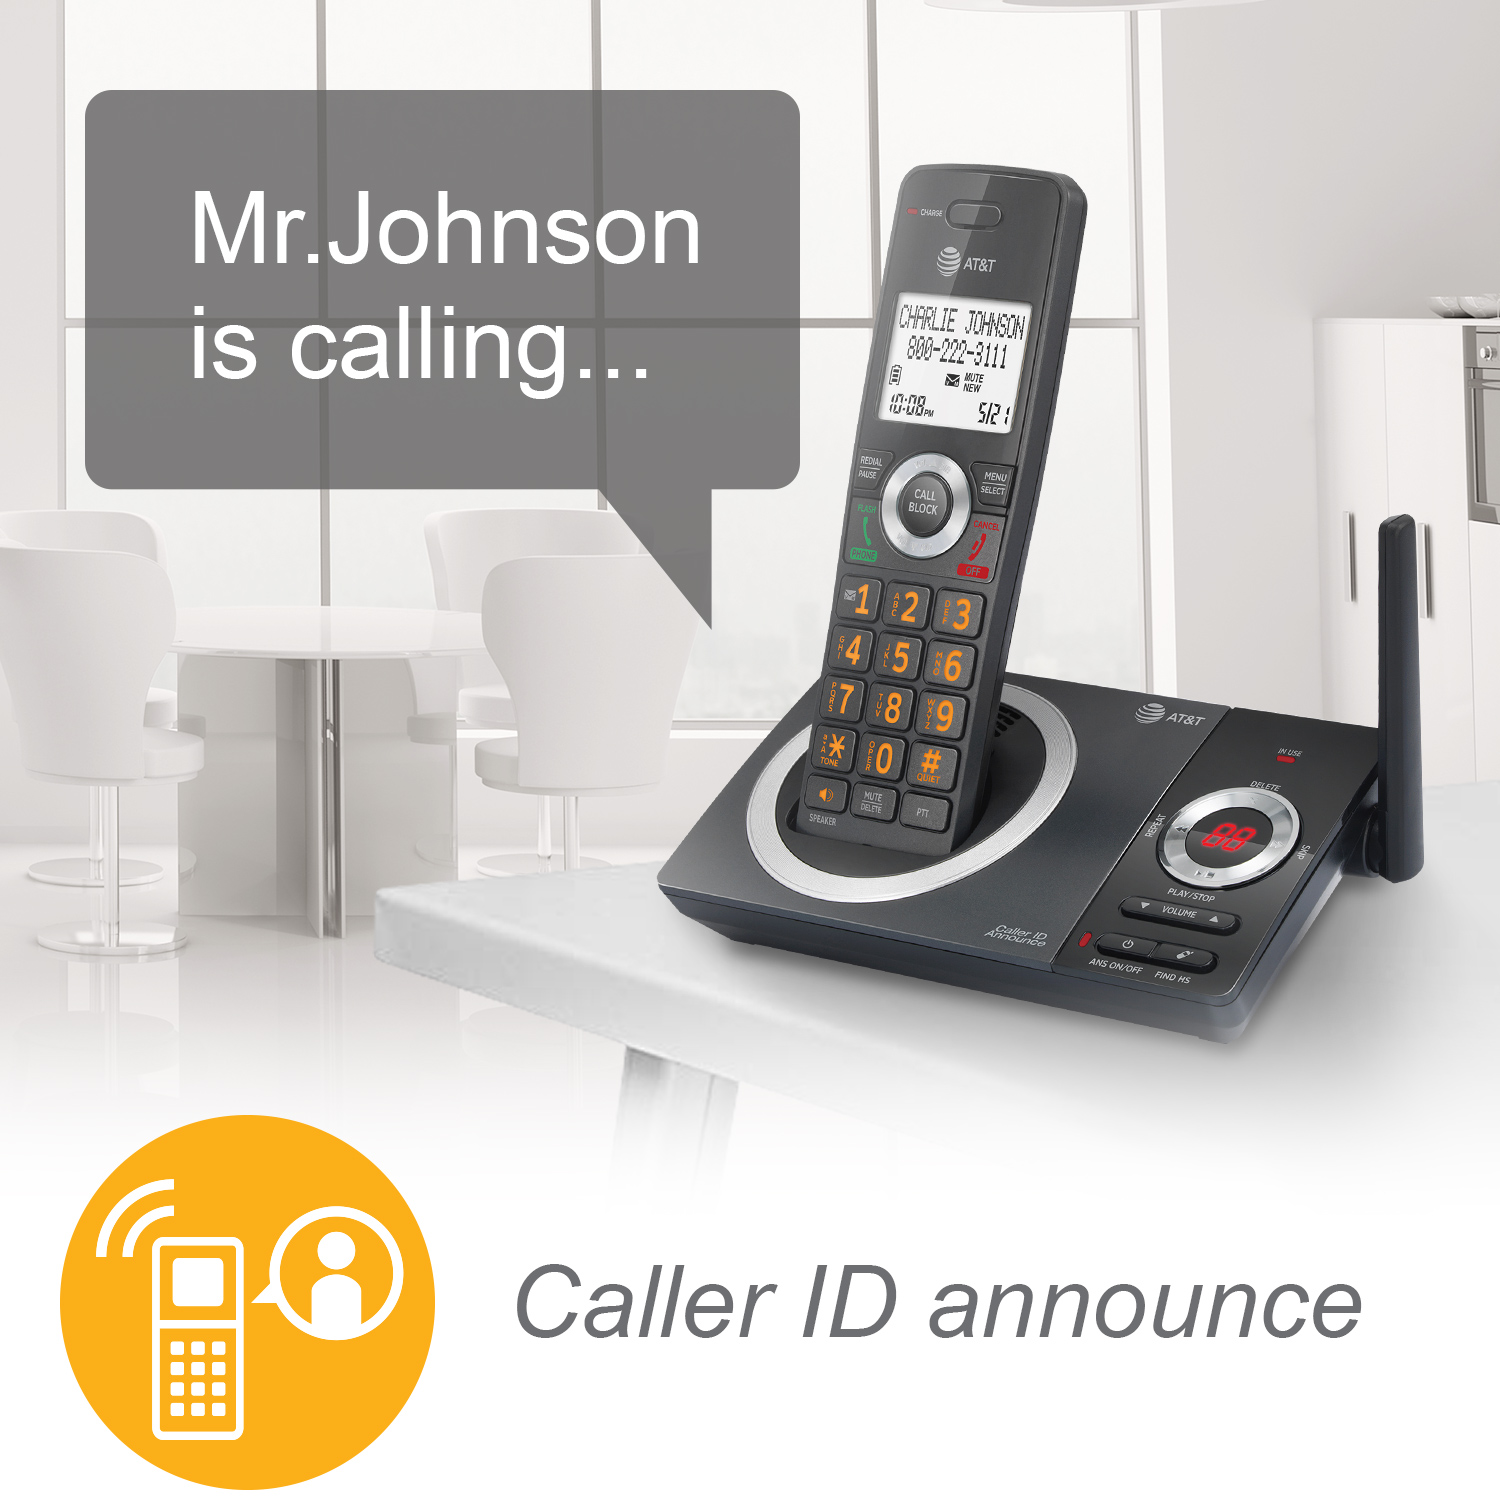 5-Handset Expandable Cordless Phone with Unsurpassed Range, Smart Call Blocker and Answering System - view 7